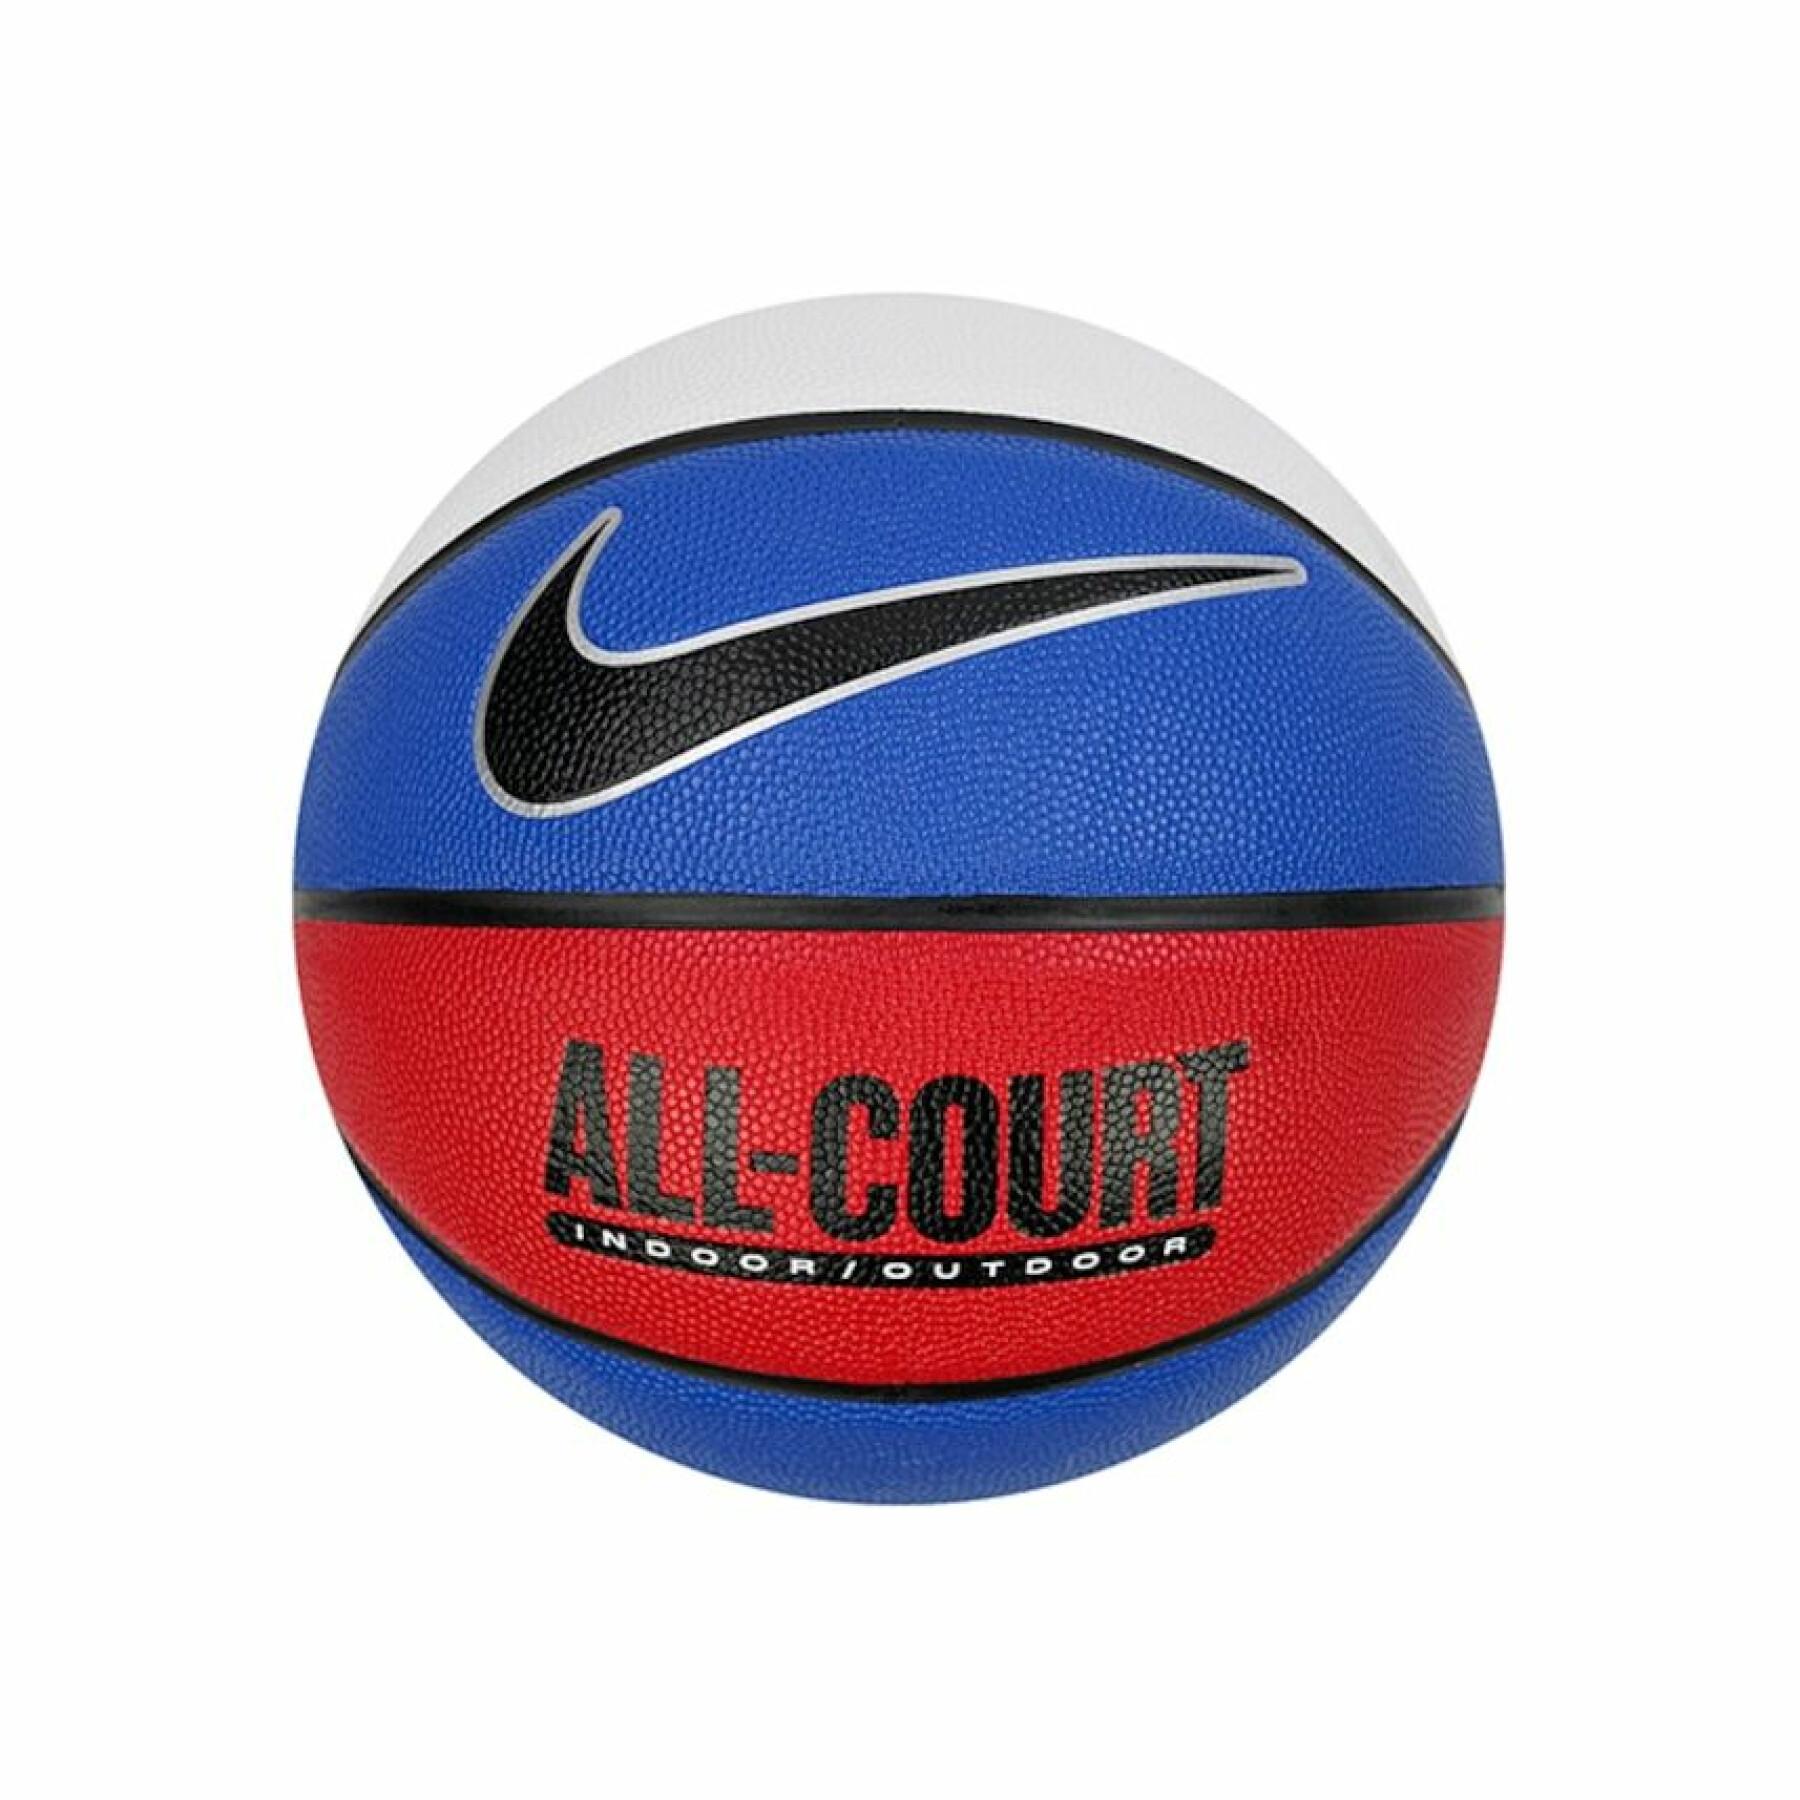 Basketboll Nike Everyday All Court 8P Deflated